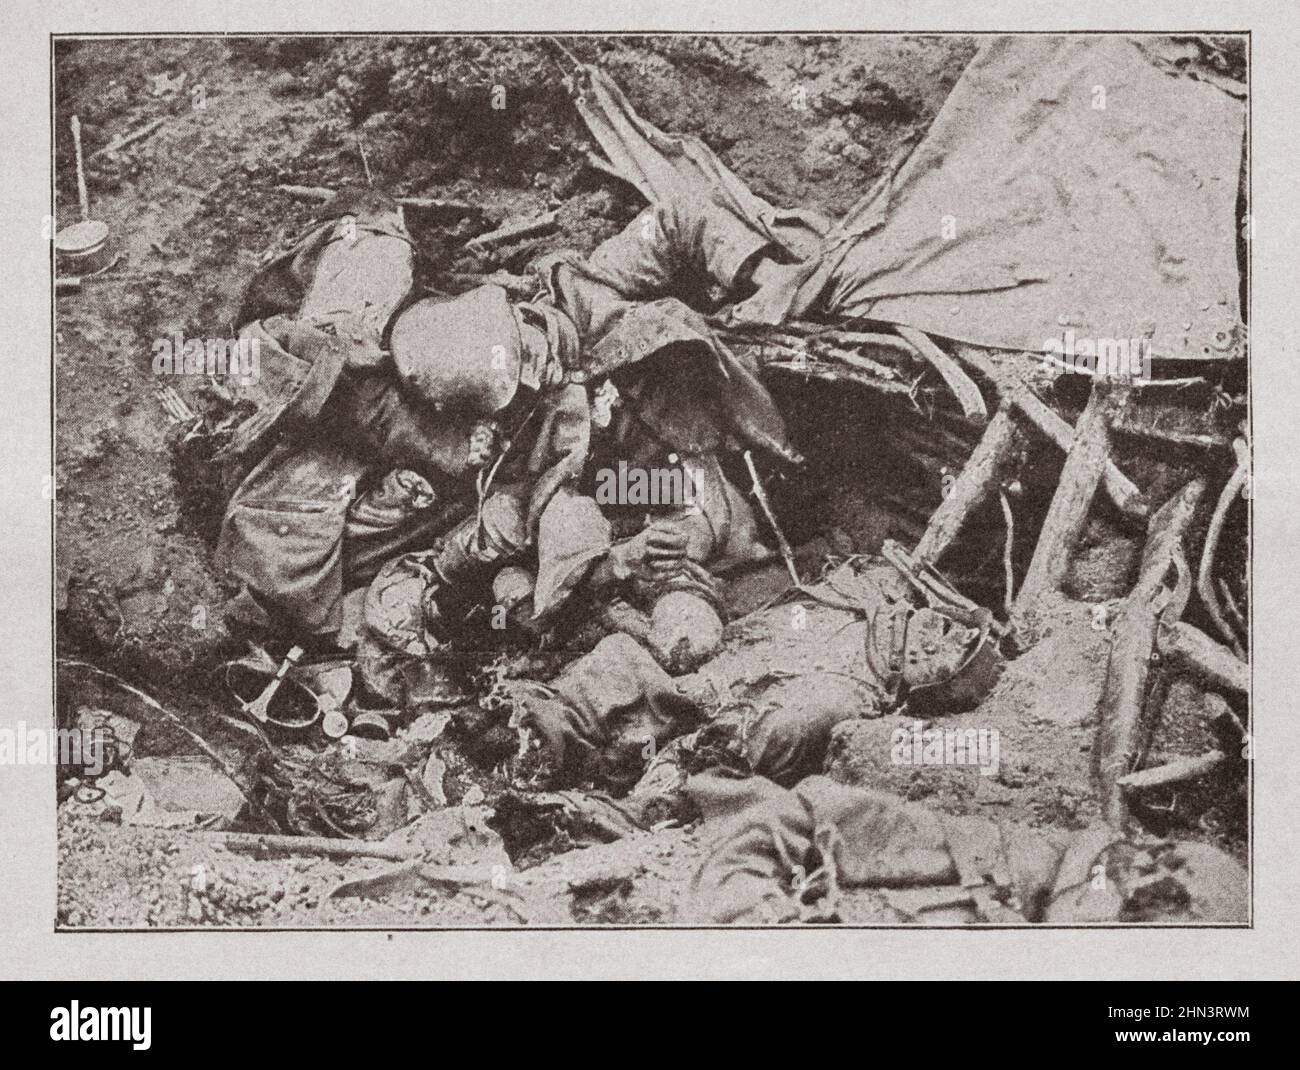 Vintage photo of World War I. Results of British attack on German positions (by air bombardment). 1914-1918 Stock Photo